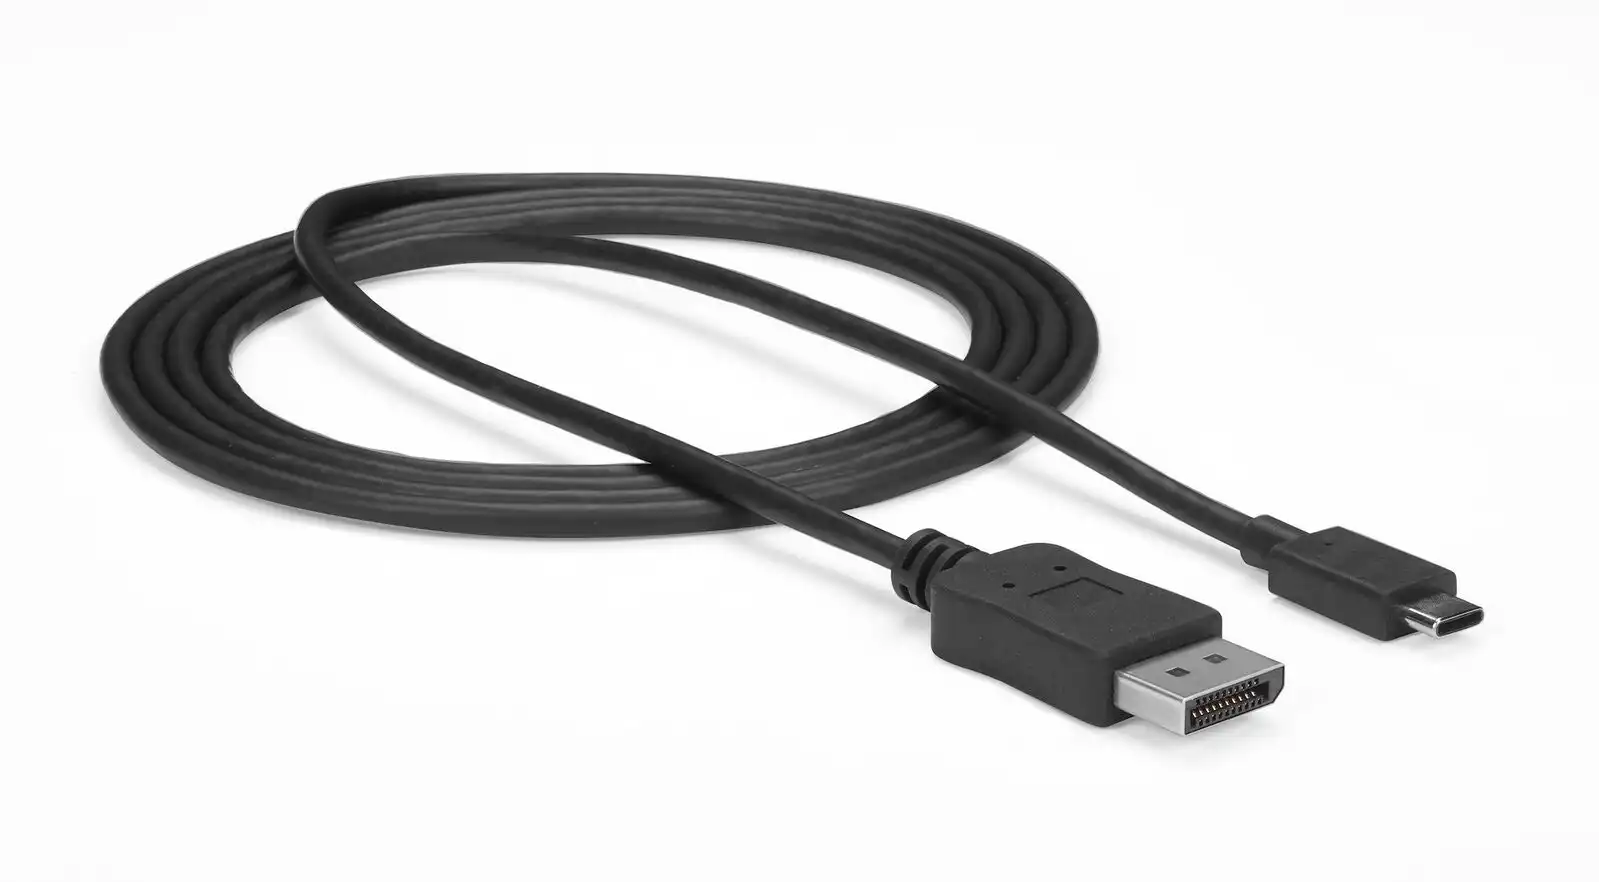 Star Tech 1.8m BLK USB C To DisplayPort 1.2 Cable 21.6Gbps 4K/60Hz For PC/Laptop